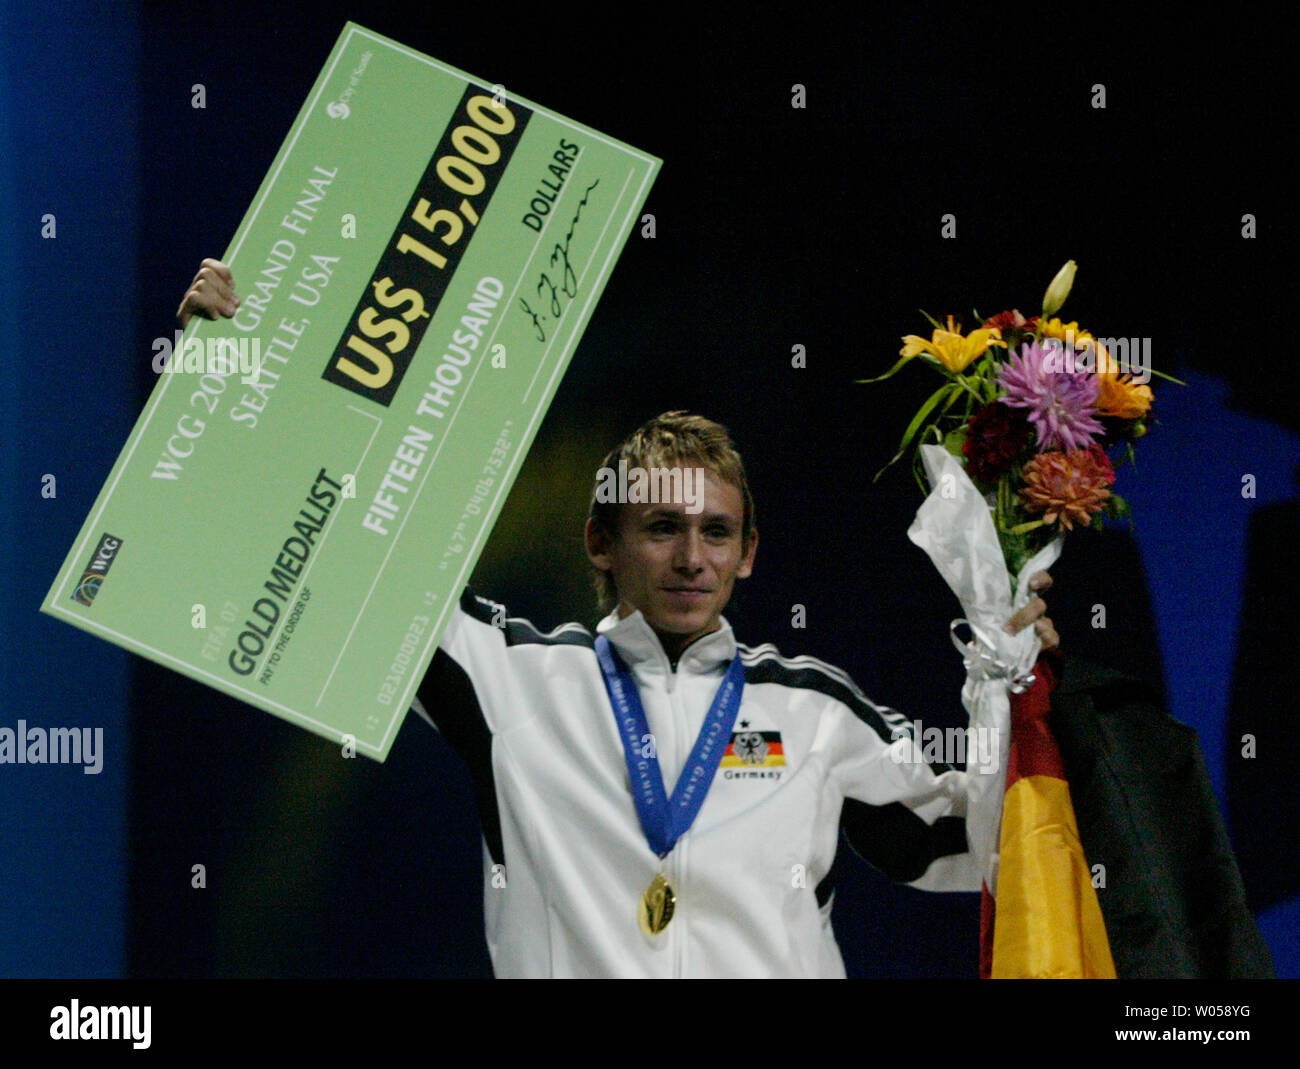 FIFA Soccer 07 Gold Medal winer Daniel Schellhase, of Germany, holds his winners check, gold medal and flowers during the World Cyber Games 2007 Closing Ceremonies held in Seattle on October 7, 2007. Over 700 players from 74 countries participated in the four day grand finals for medals, prizes and 00,000. (UPI Photo/Jim Bryant) Stock Photo